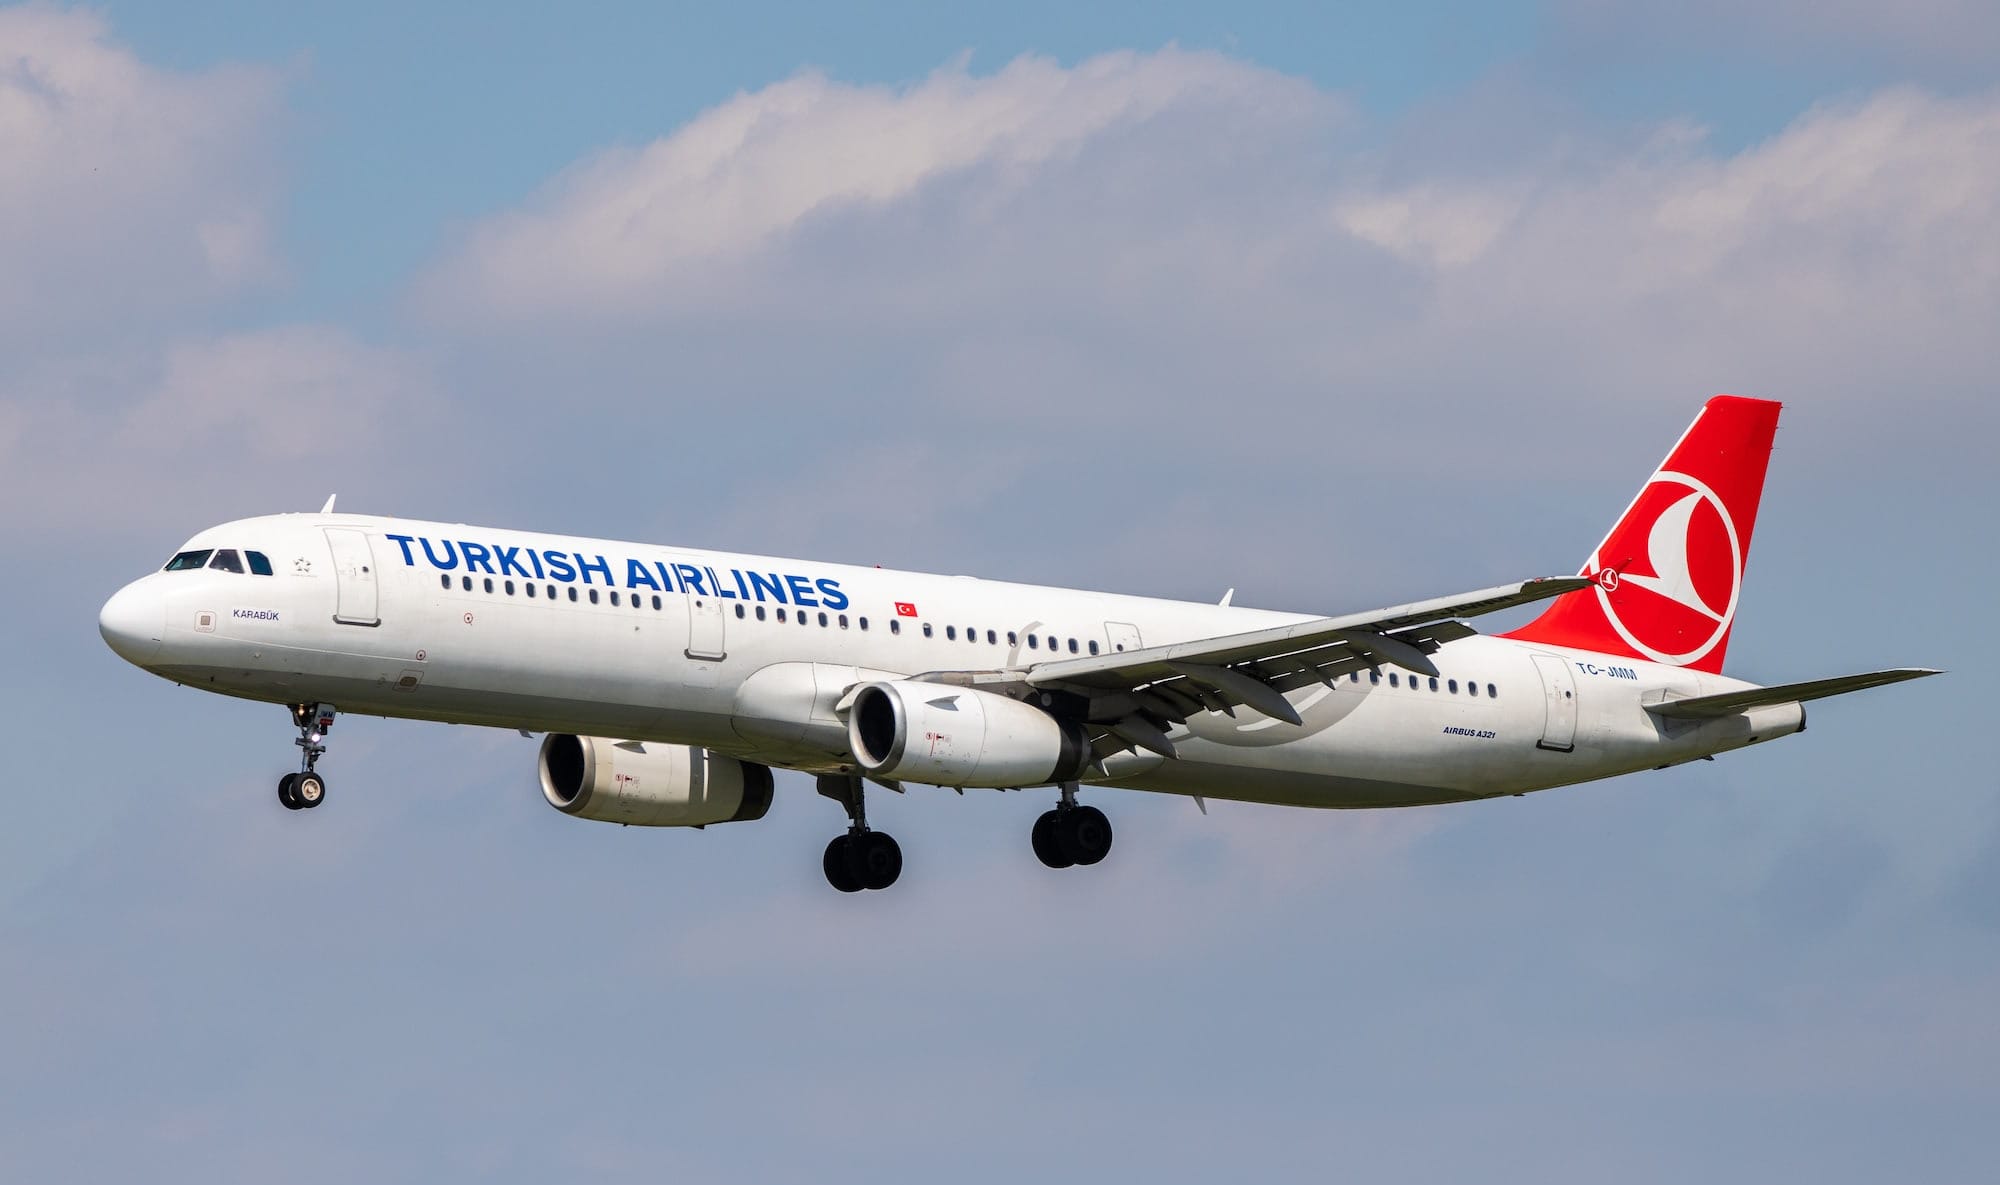 Turkish Airlines Expands Fleet with Order of 220 Airbus Aircraft, Including A321s and A350s